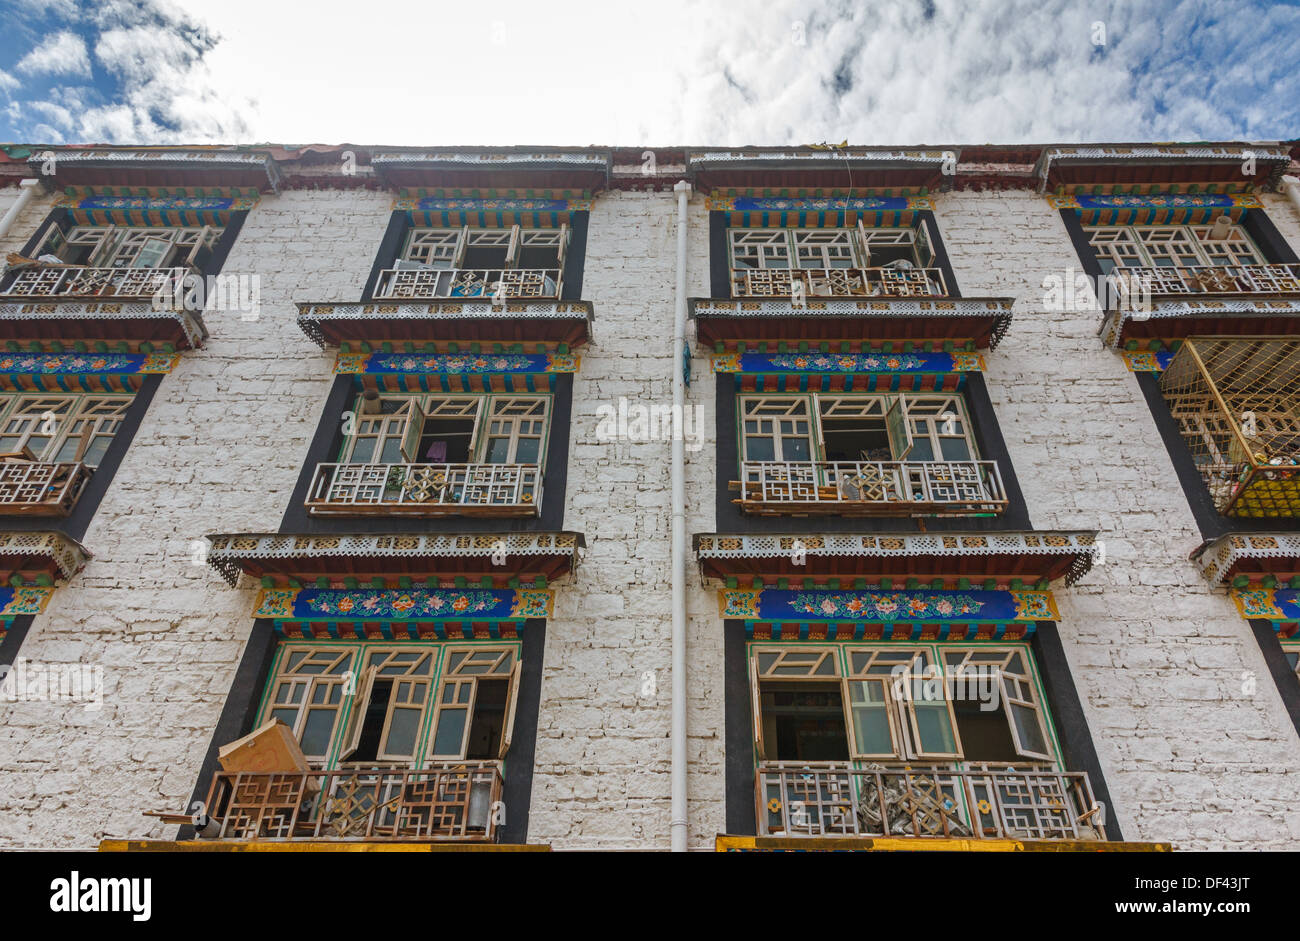 Typical traditional white Tibetan building in Lhasa, Tibet Stock Photo